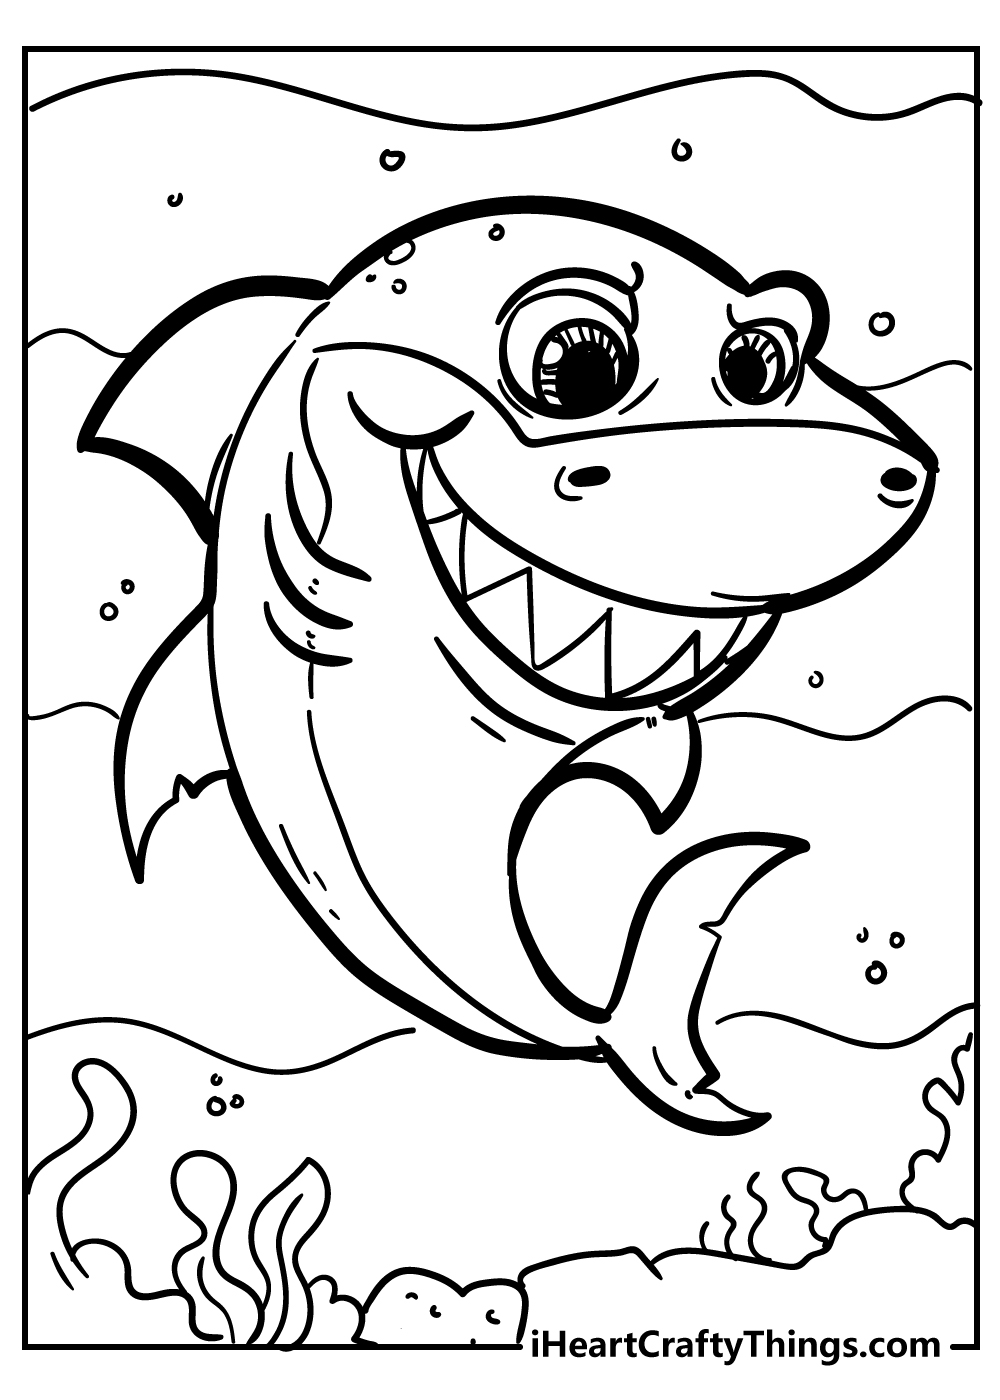 Shark coloring pages for adults free printable